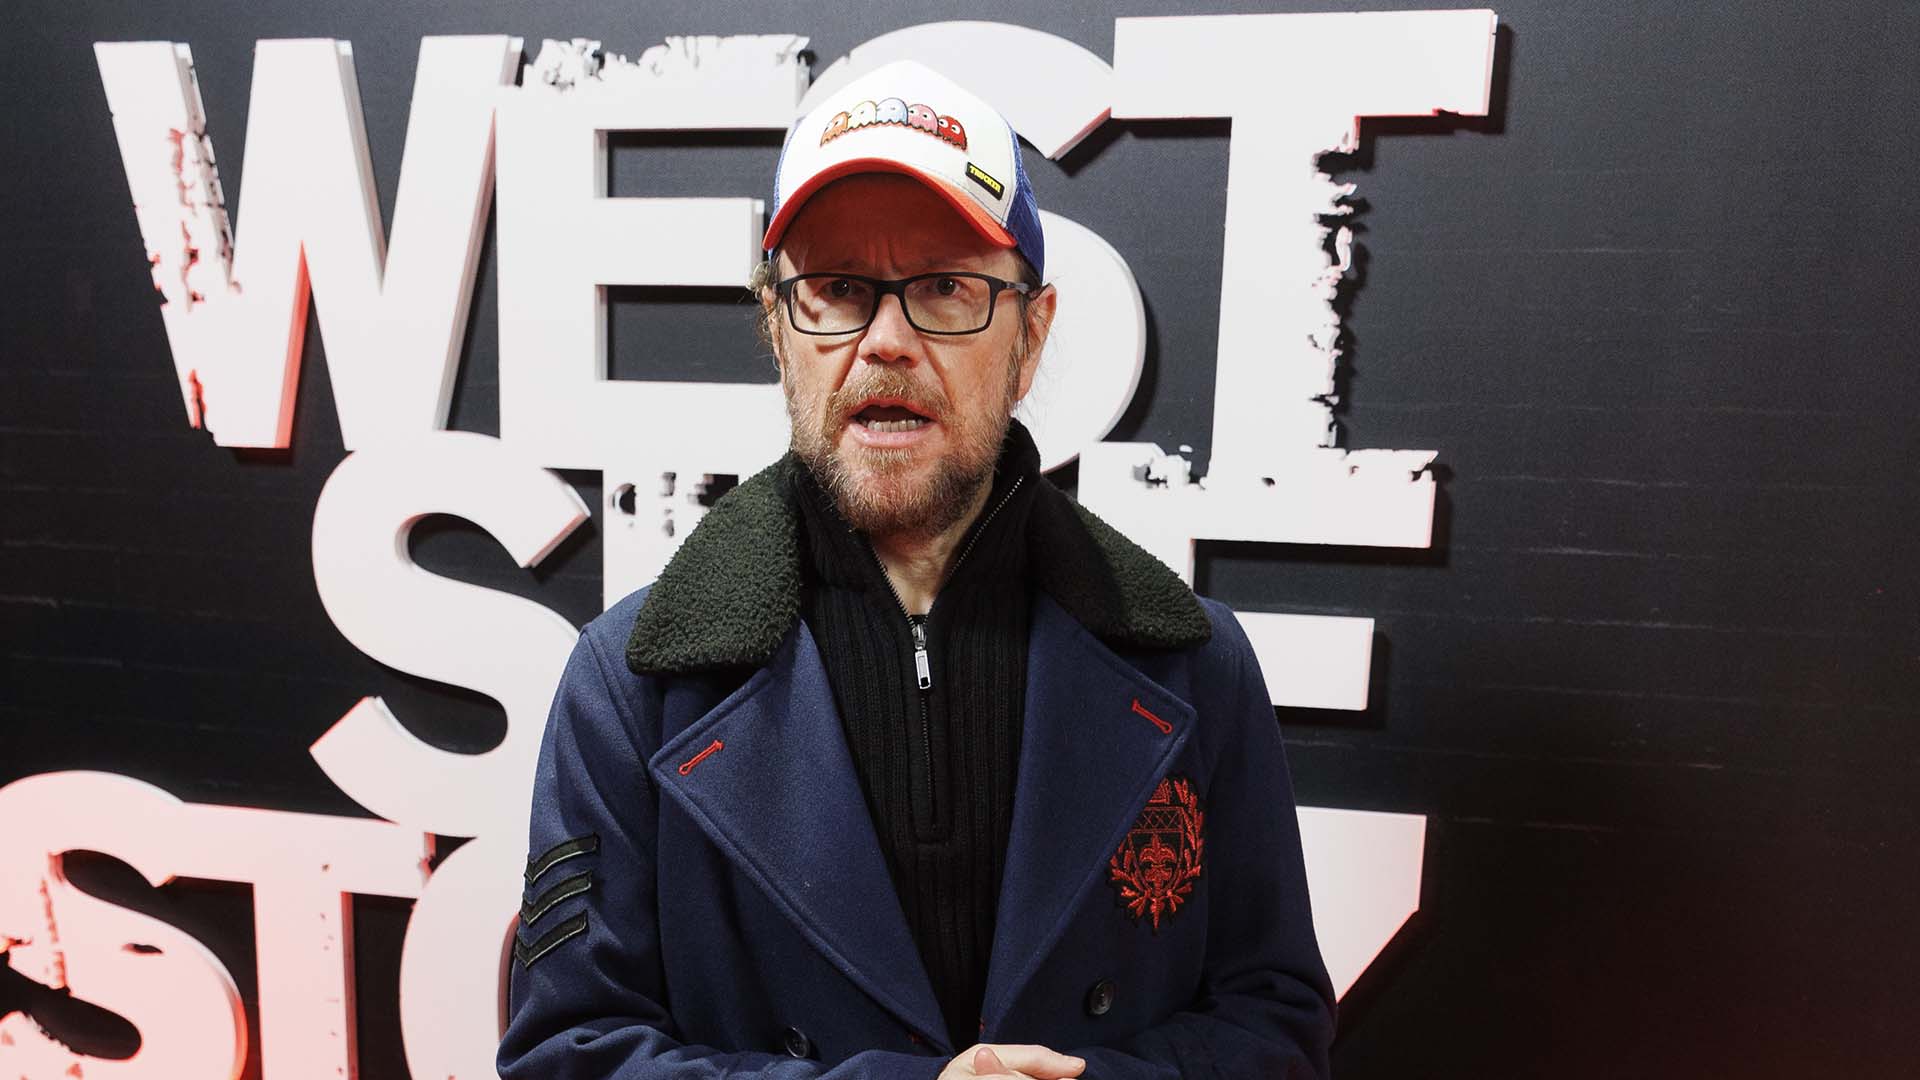 Actor Santiago Segura attending premiere film " West Side Story " in Madrid on Tuesday, 14 December 2021.